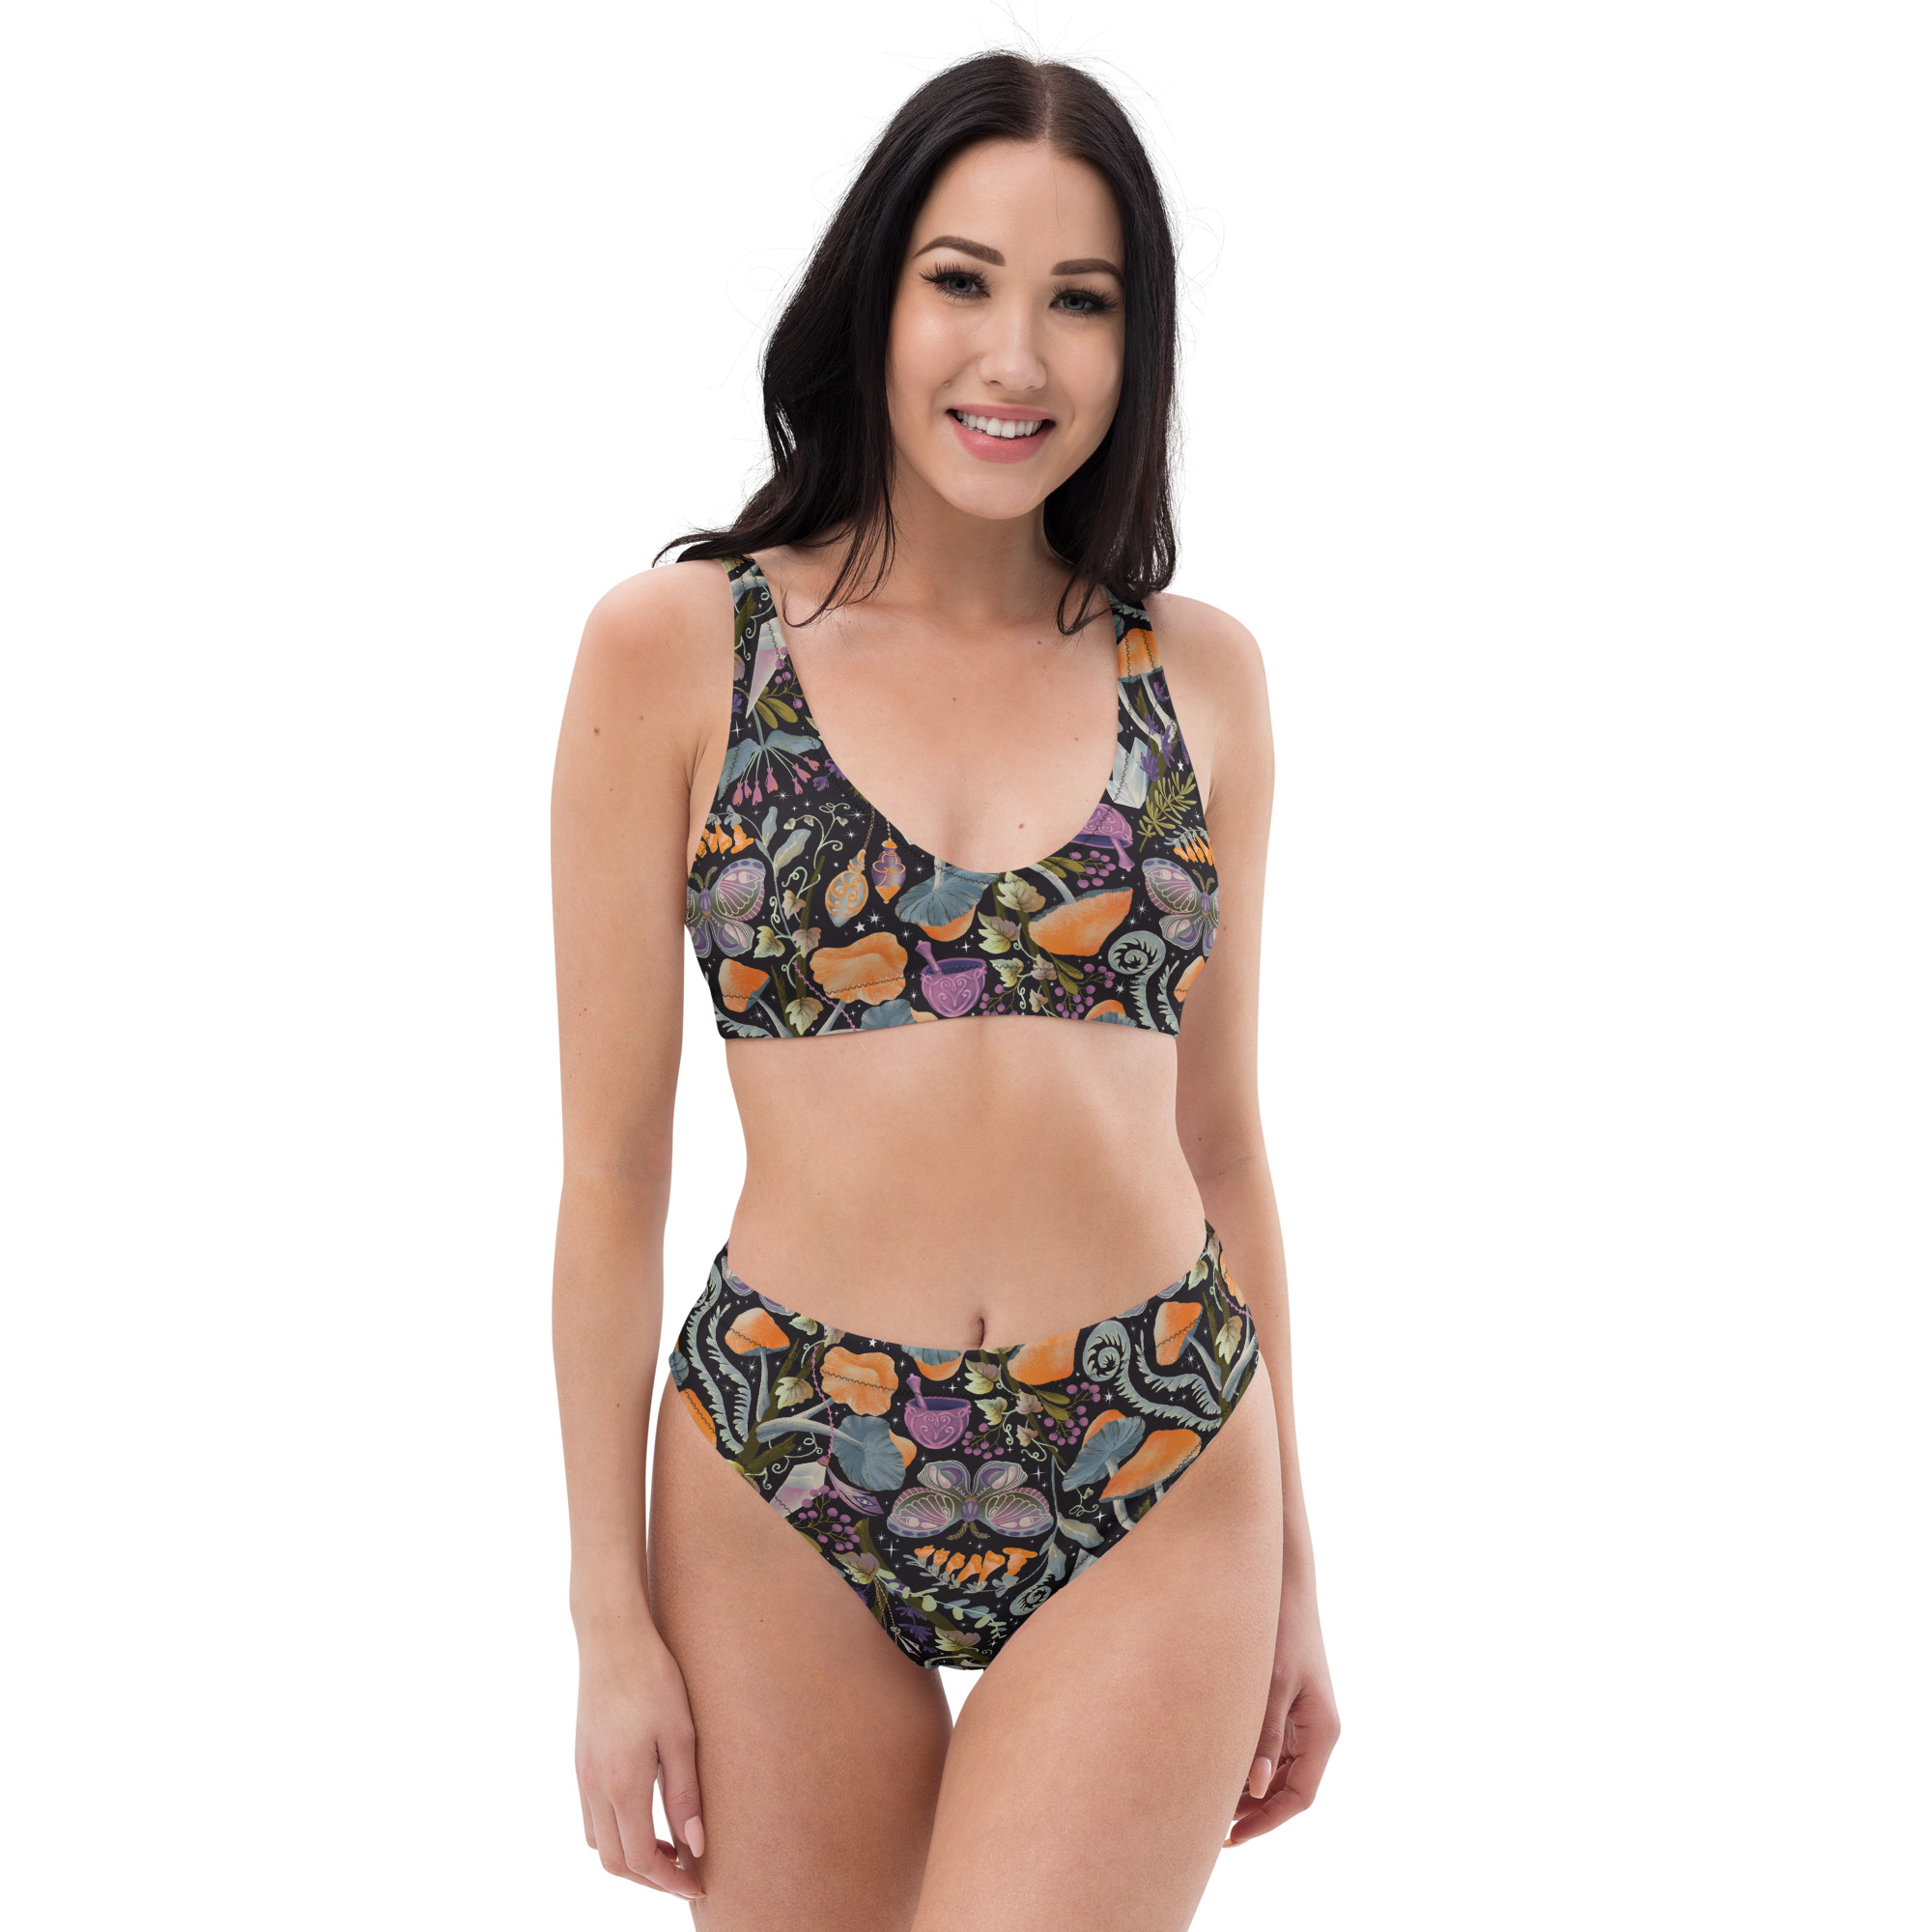 A model wearing a high-waisted bikini set made from recycled materials with a whimsical mushroom design. The top has a scoop sport bra style, and the bottom has a flattering high-waist cut.